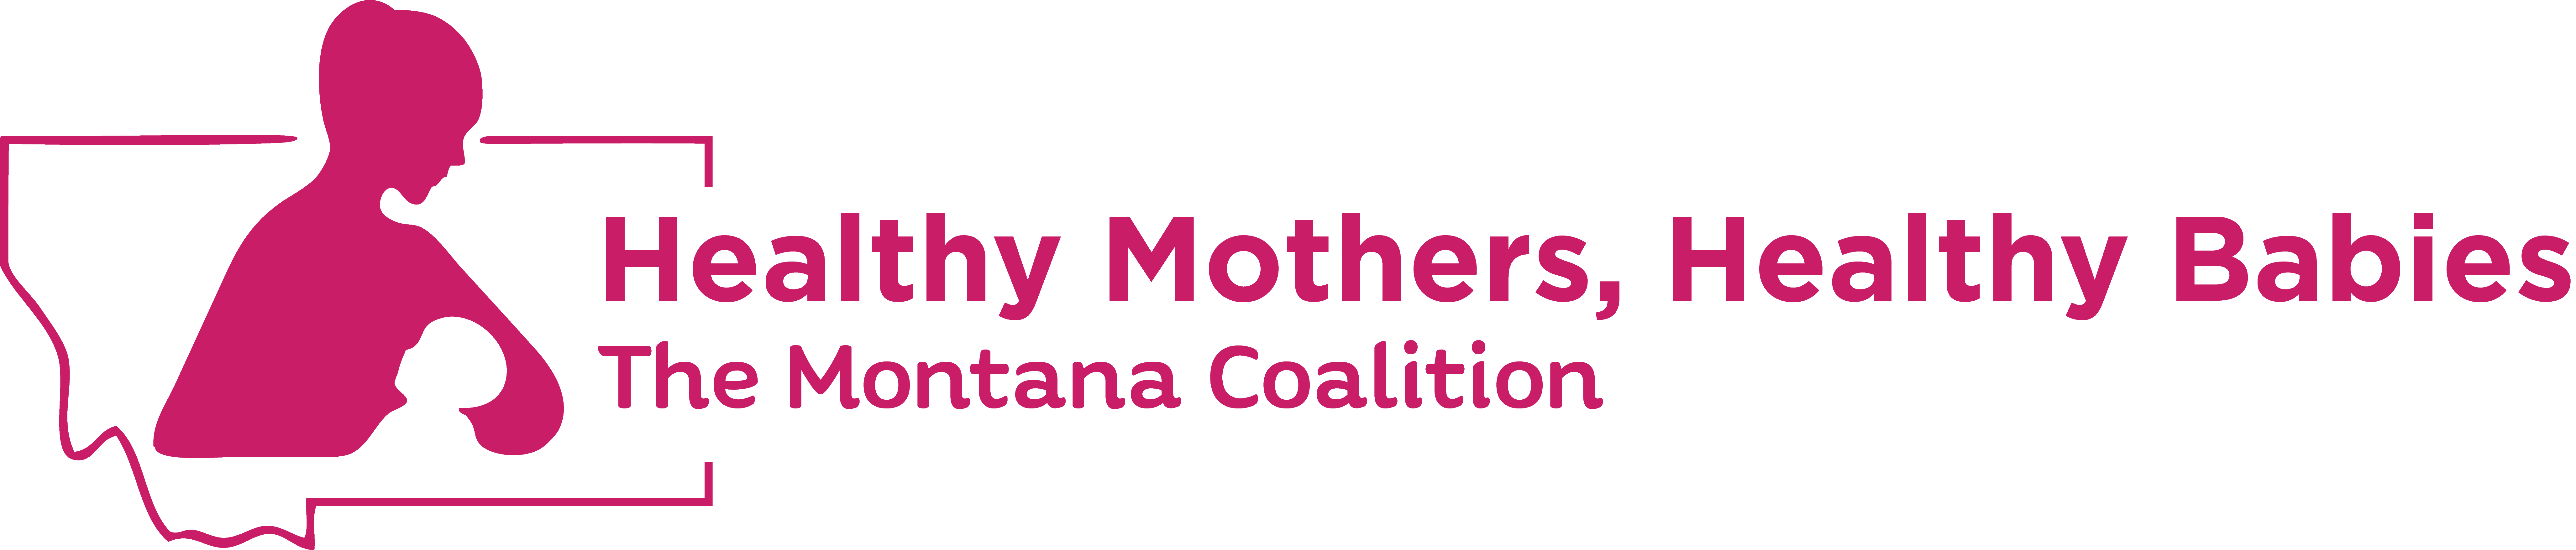 HEALTHY MOTHERS, HEALTHY BABIES: THE MONTANA COALITION – Tenant Connect